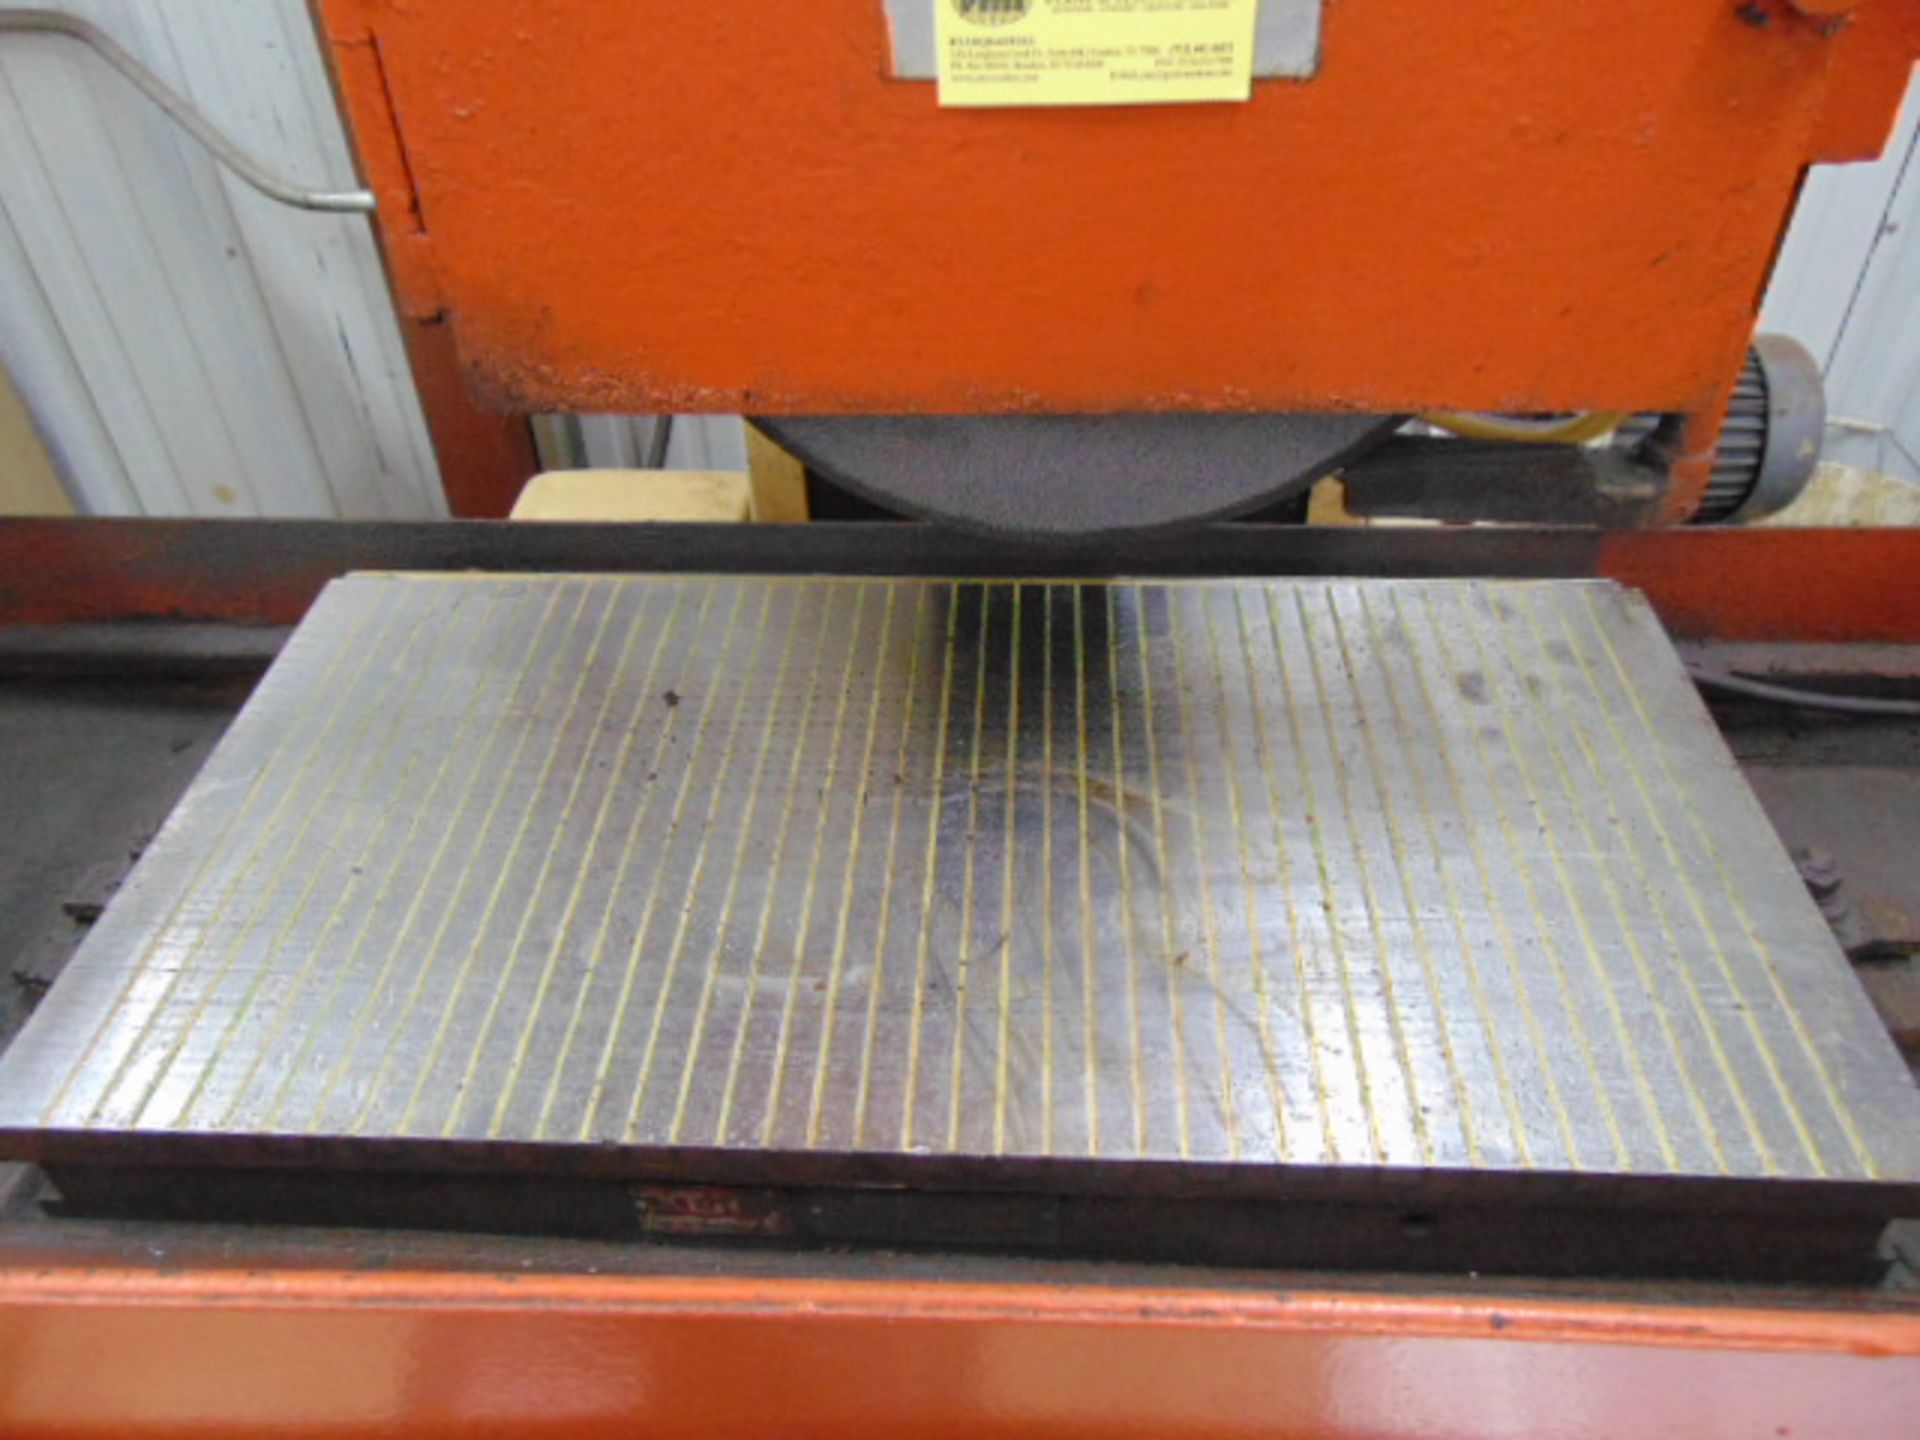 HYDRAULIC SURFACE GRINDER, KENT 12” X 24” MDL. KGS-306AHD, incremental downfeed, 12” x 2” max. wheel - Image 3 of 5